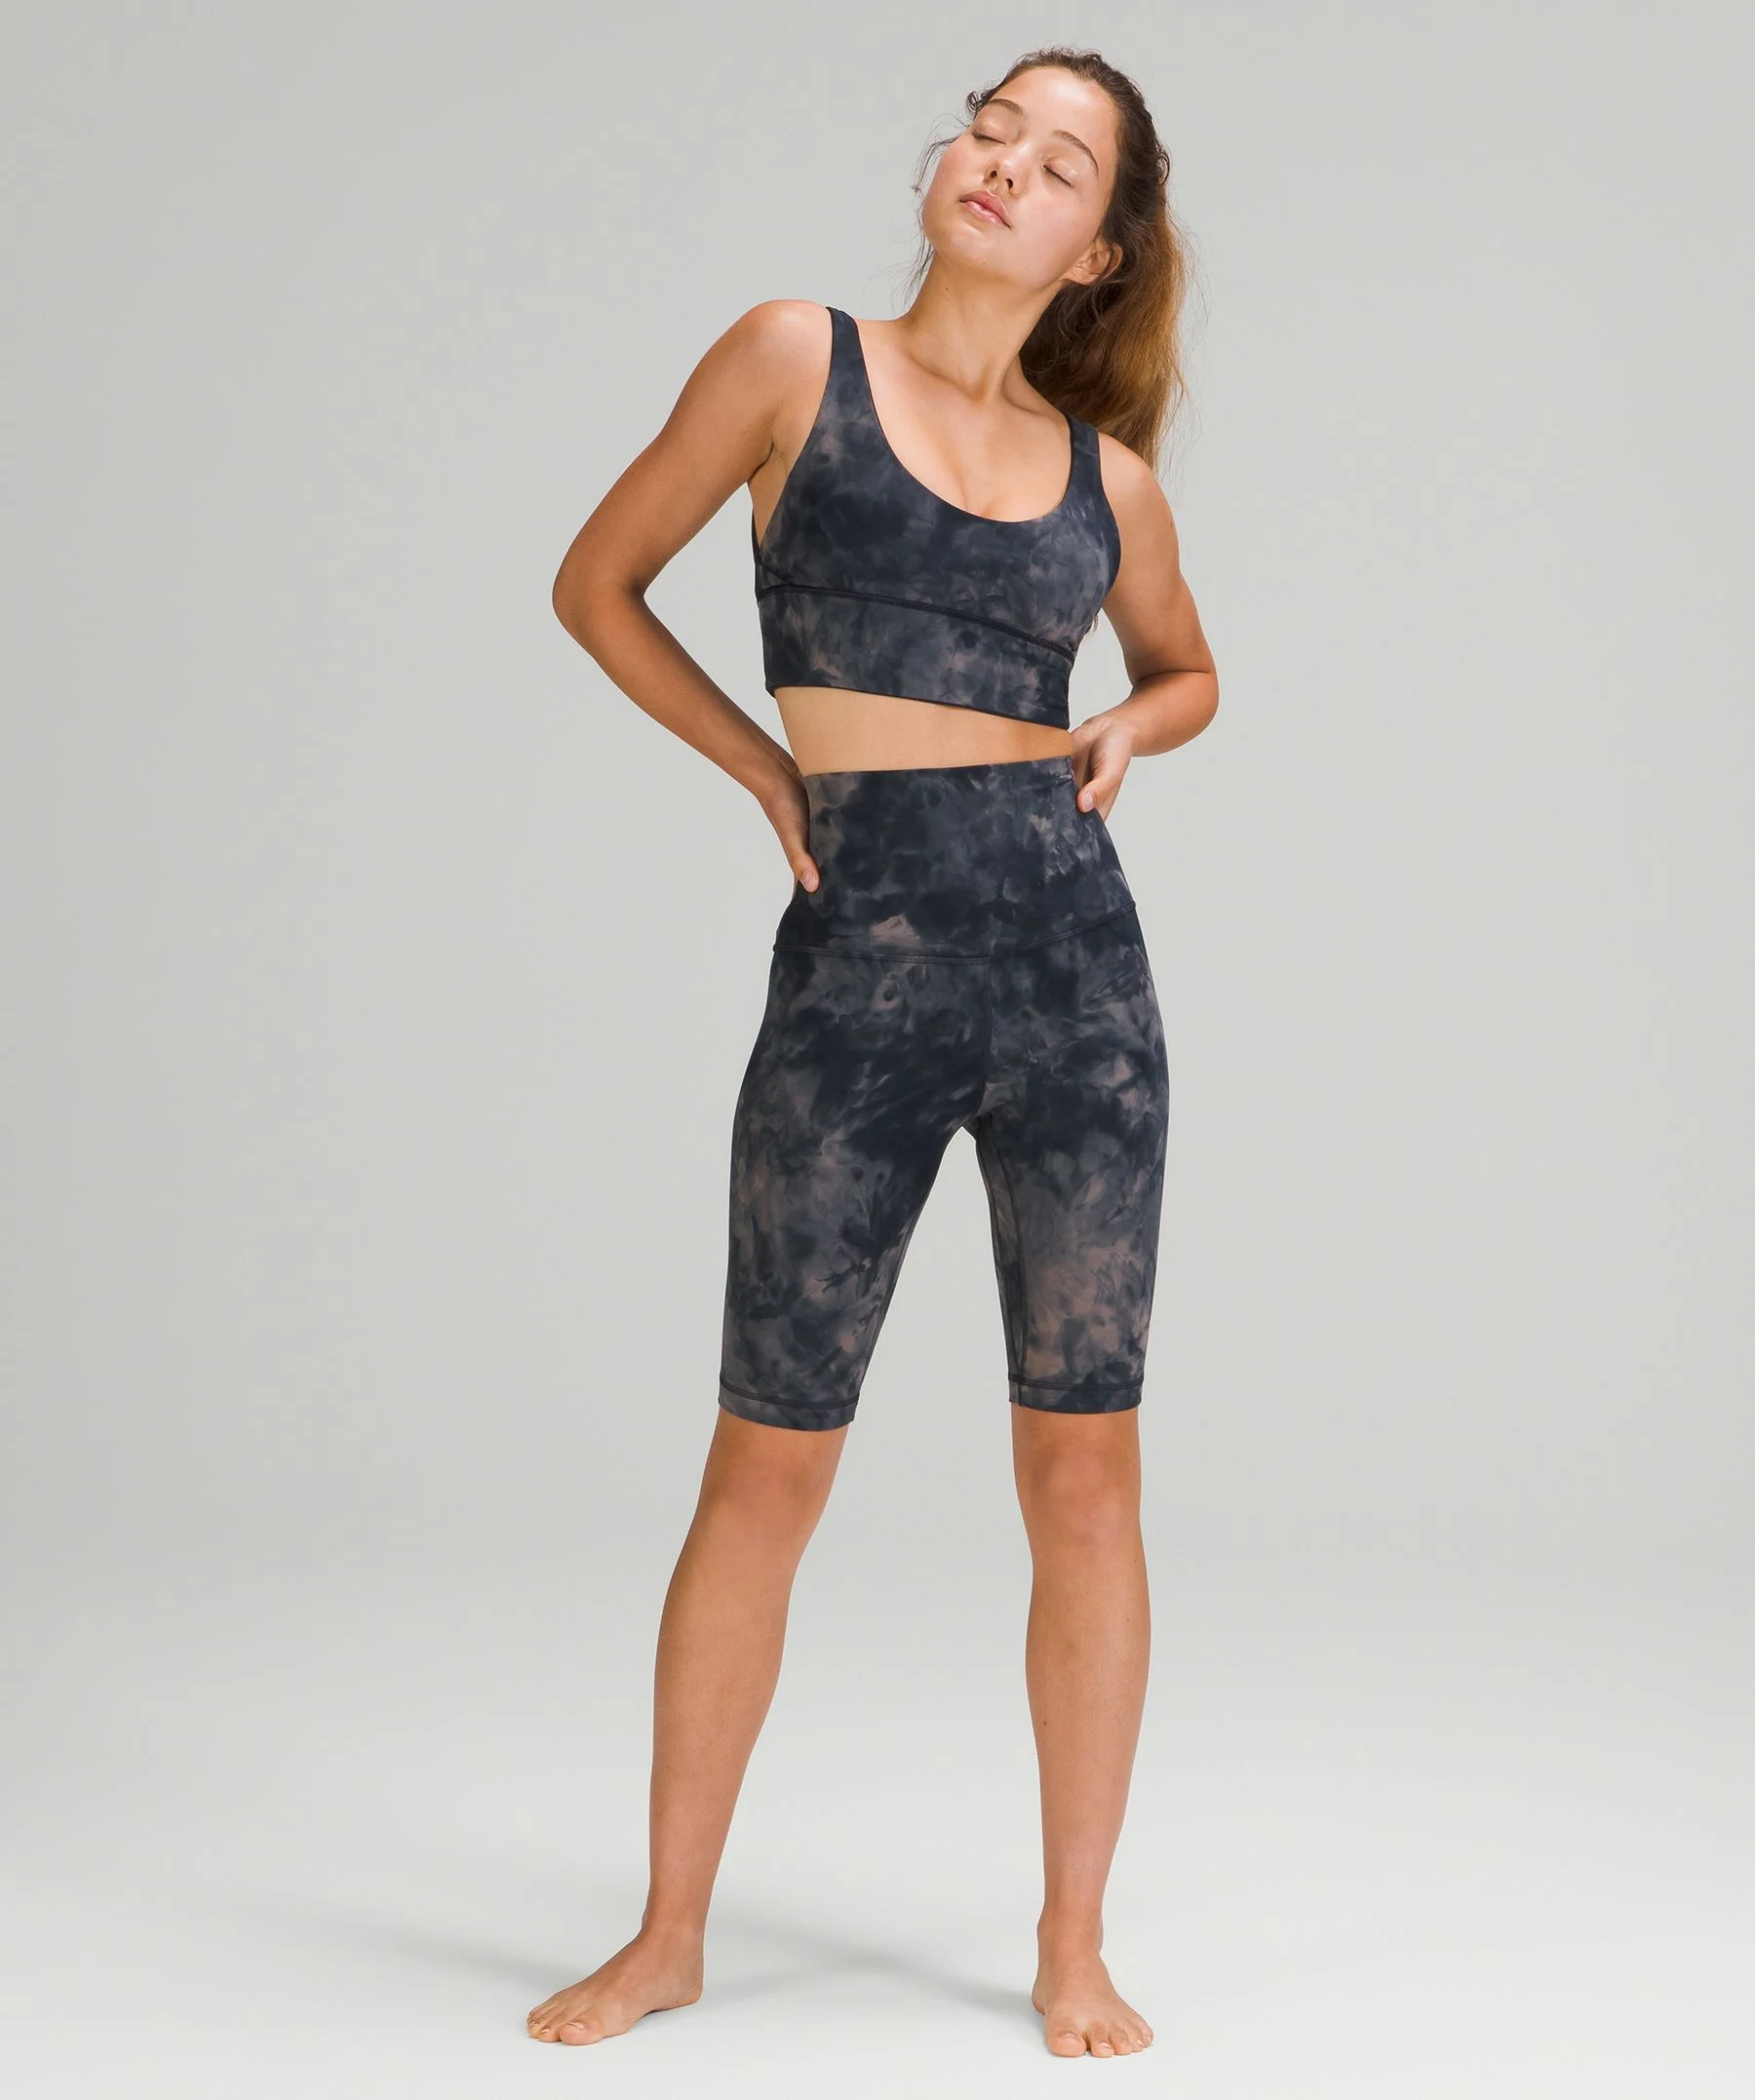 Lululemon Align Super High Rise Short *10 - Wee Are From Space